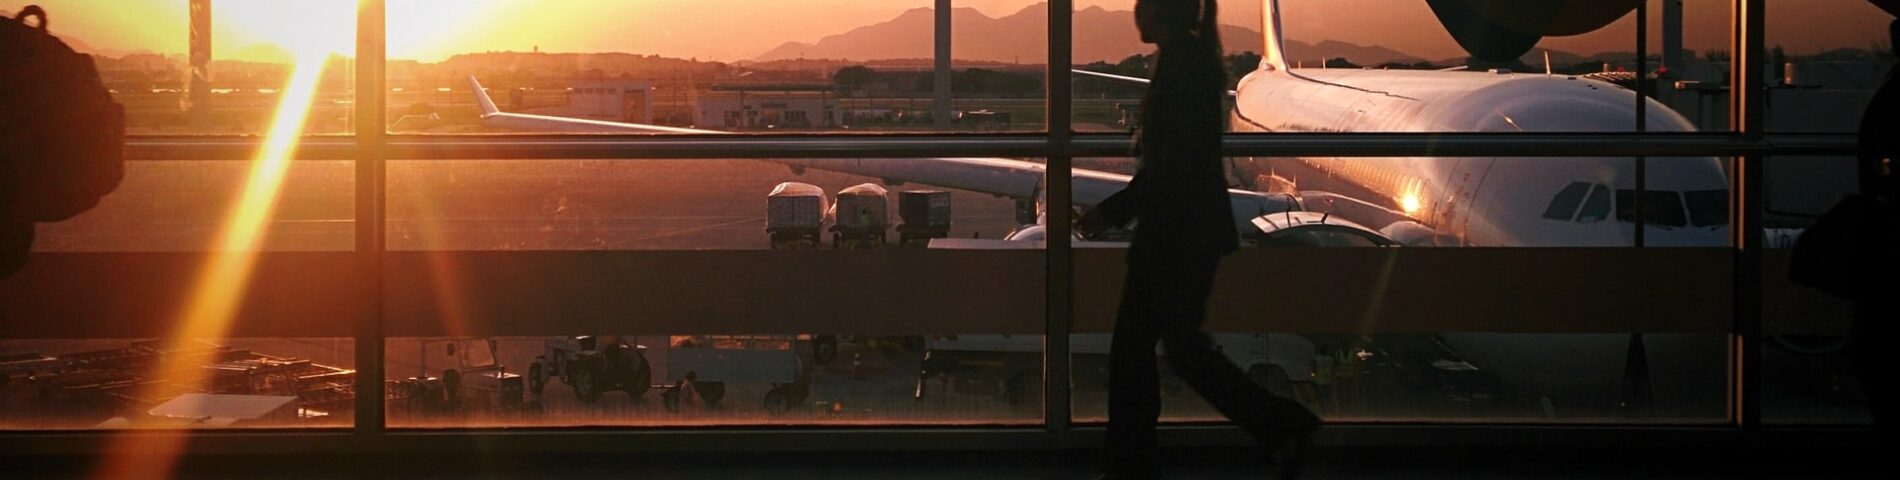 silhouette of person walking in airport